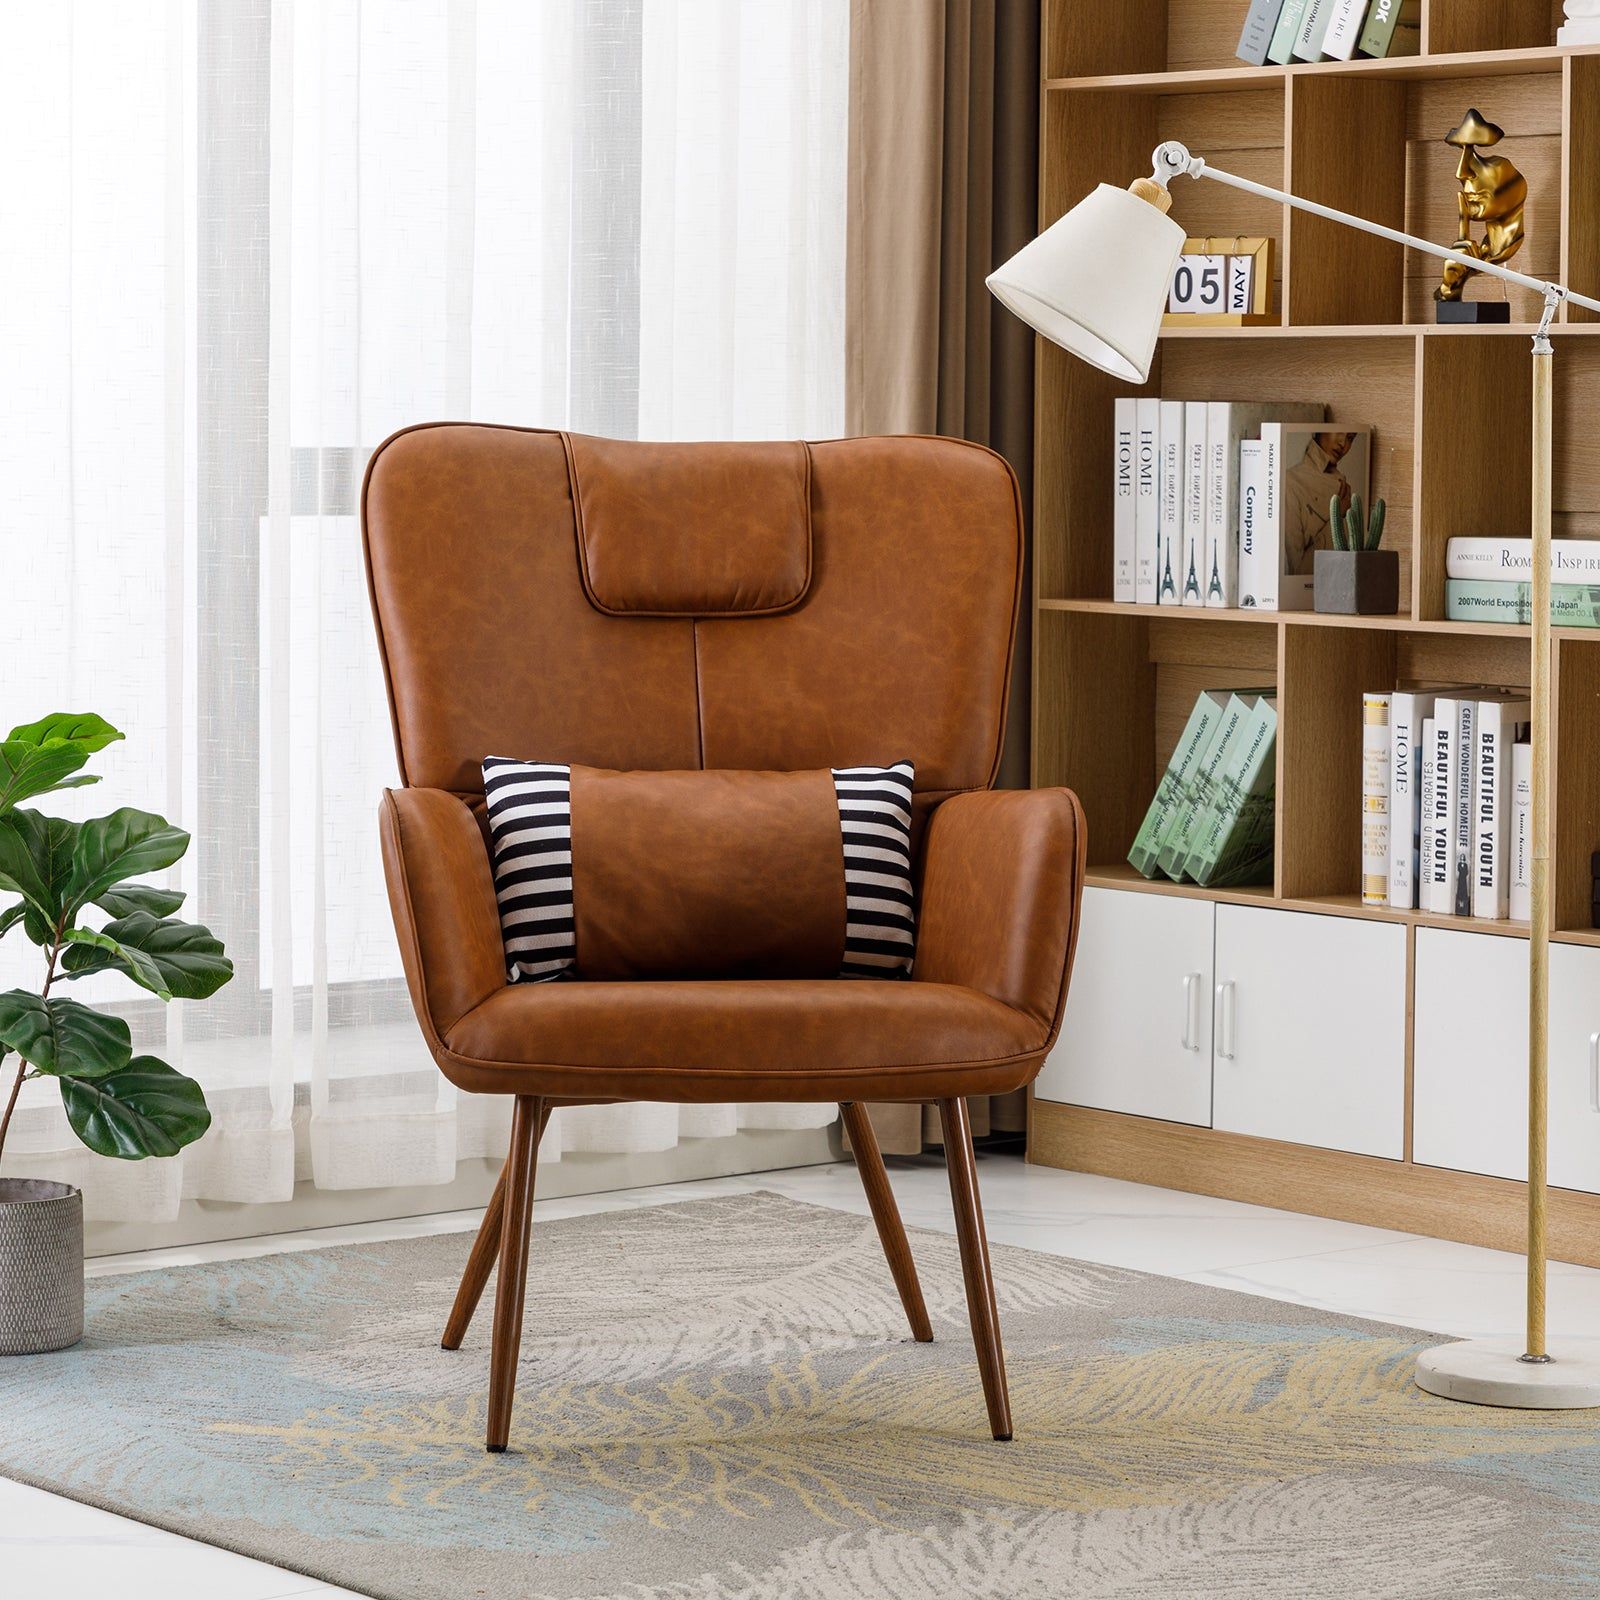 Ultimate Comfort: The Best Wingback Chair Recliners for Relaxation